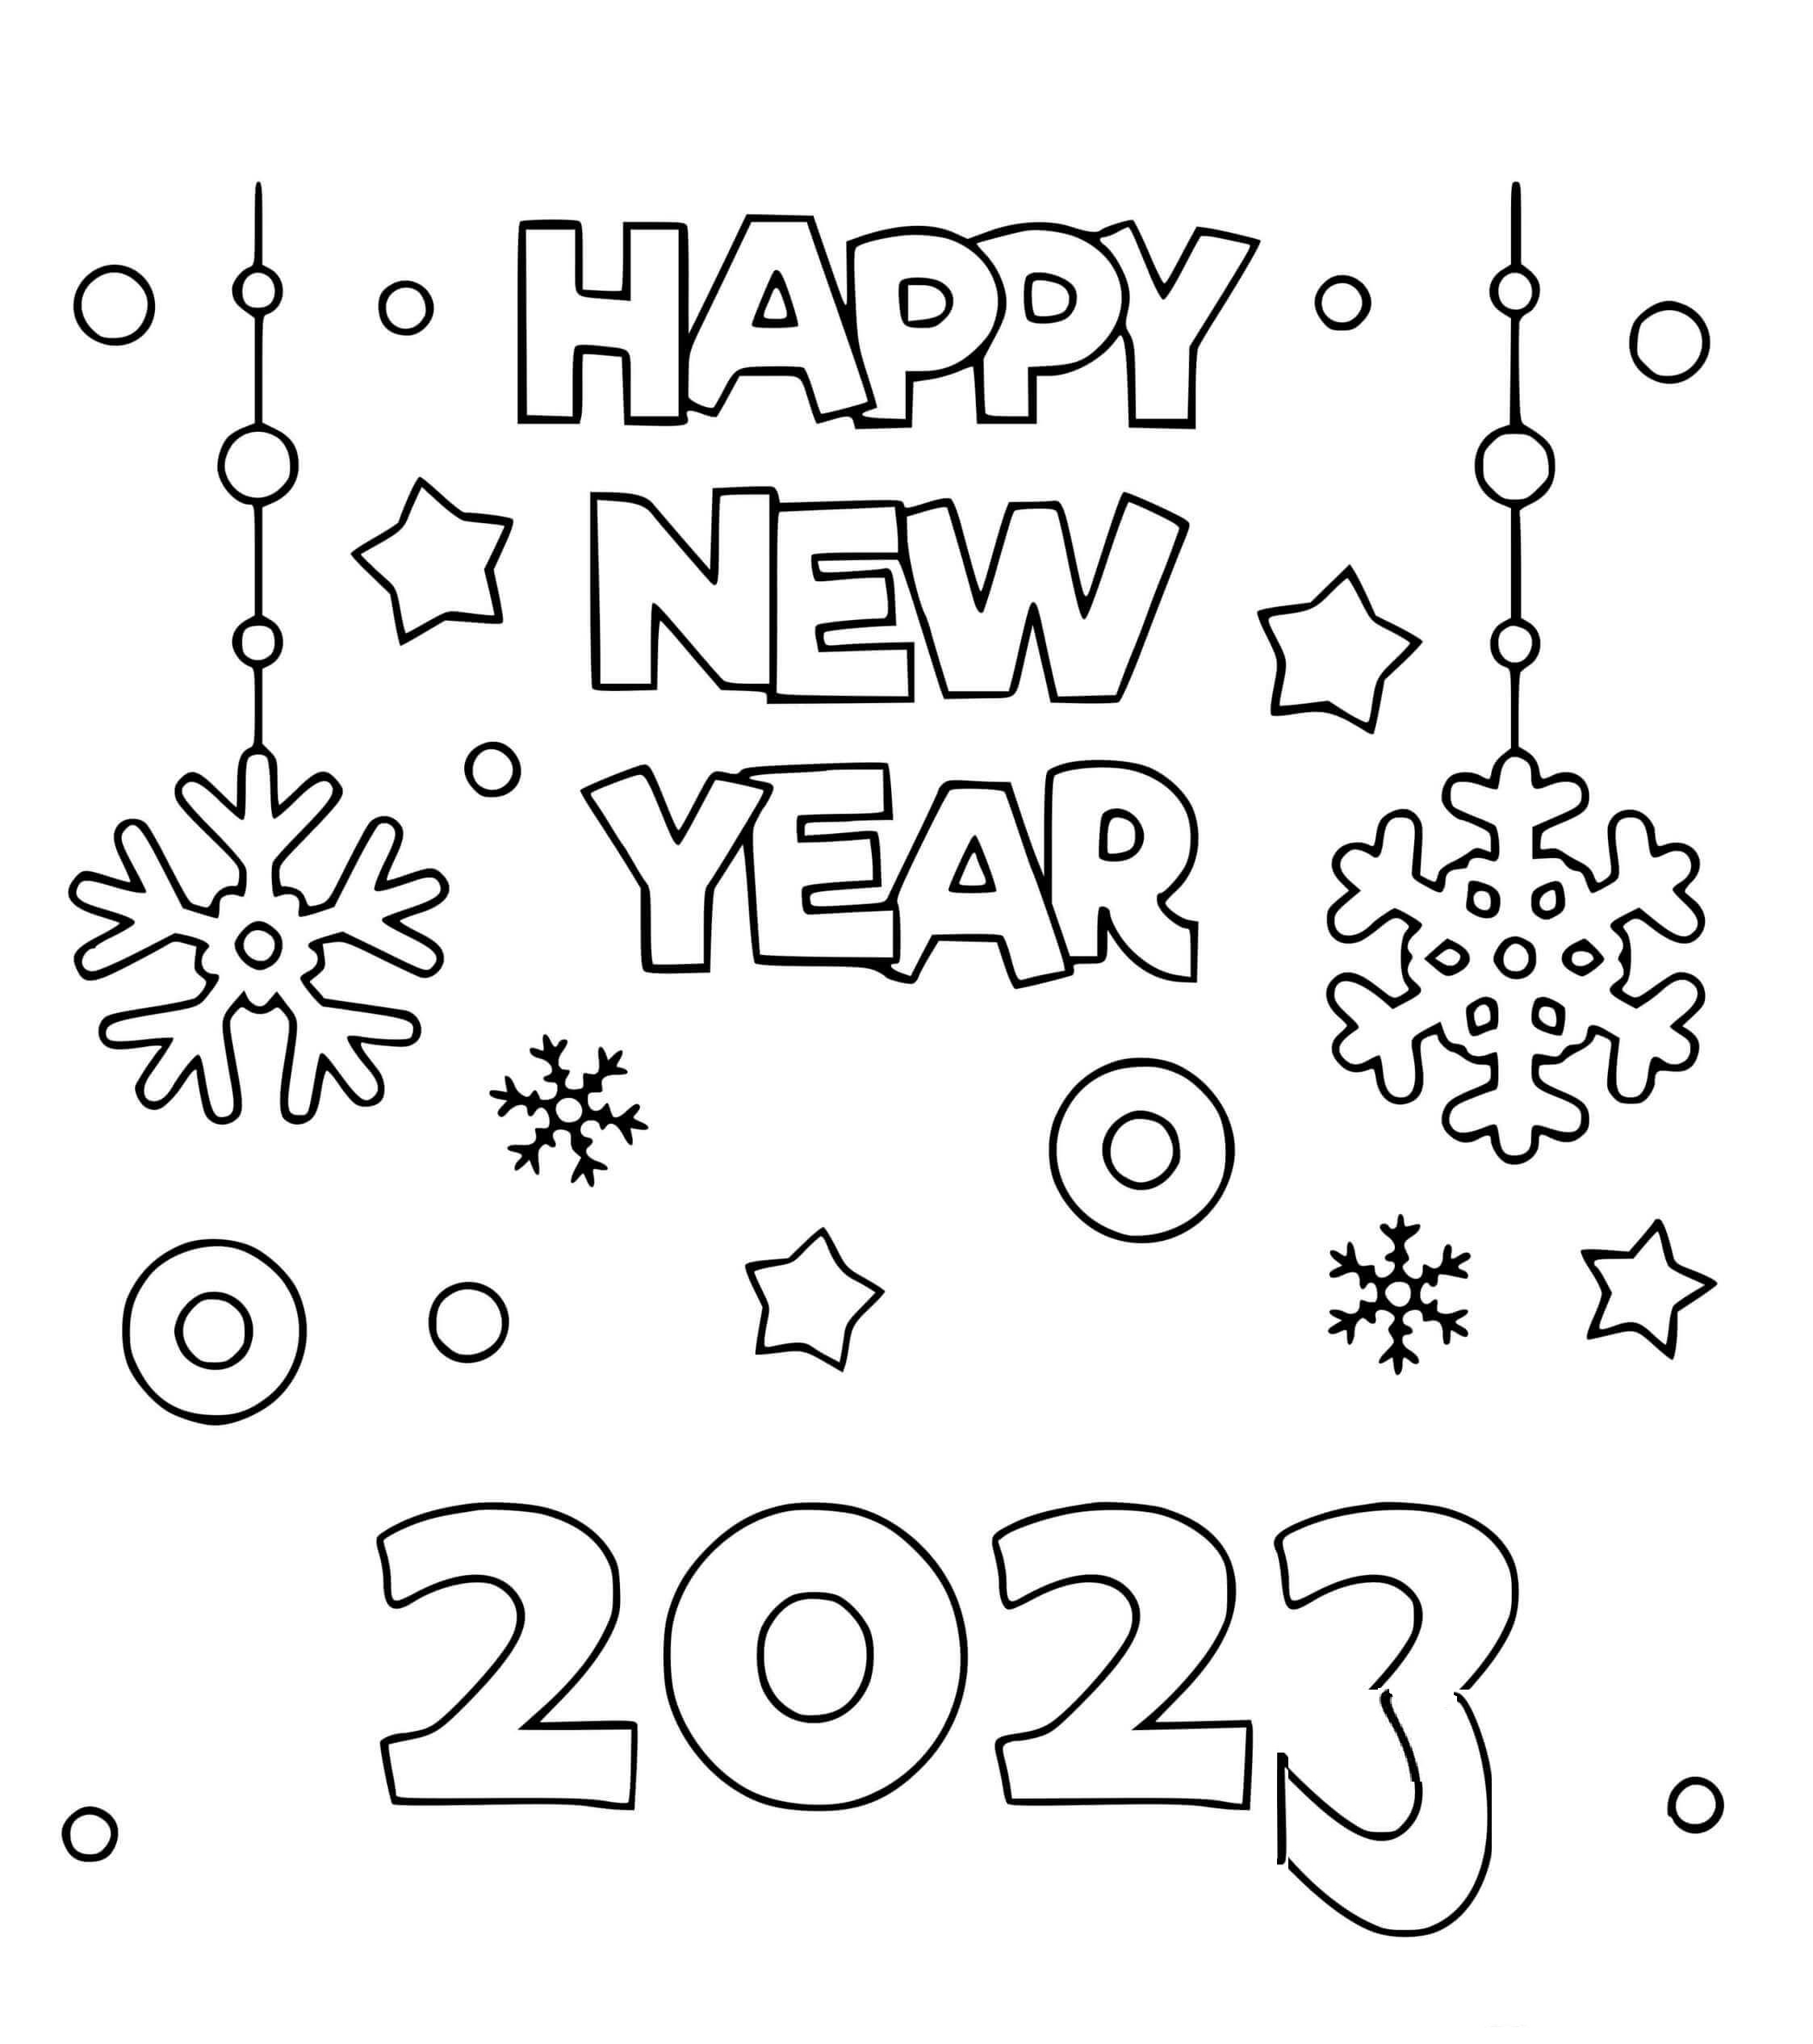 Printable New Year   2023 live.com Coloring Page for kids.